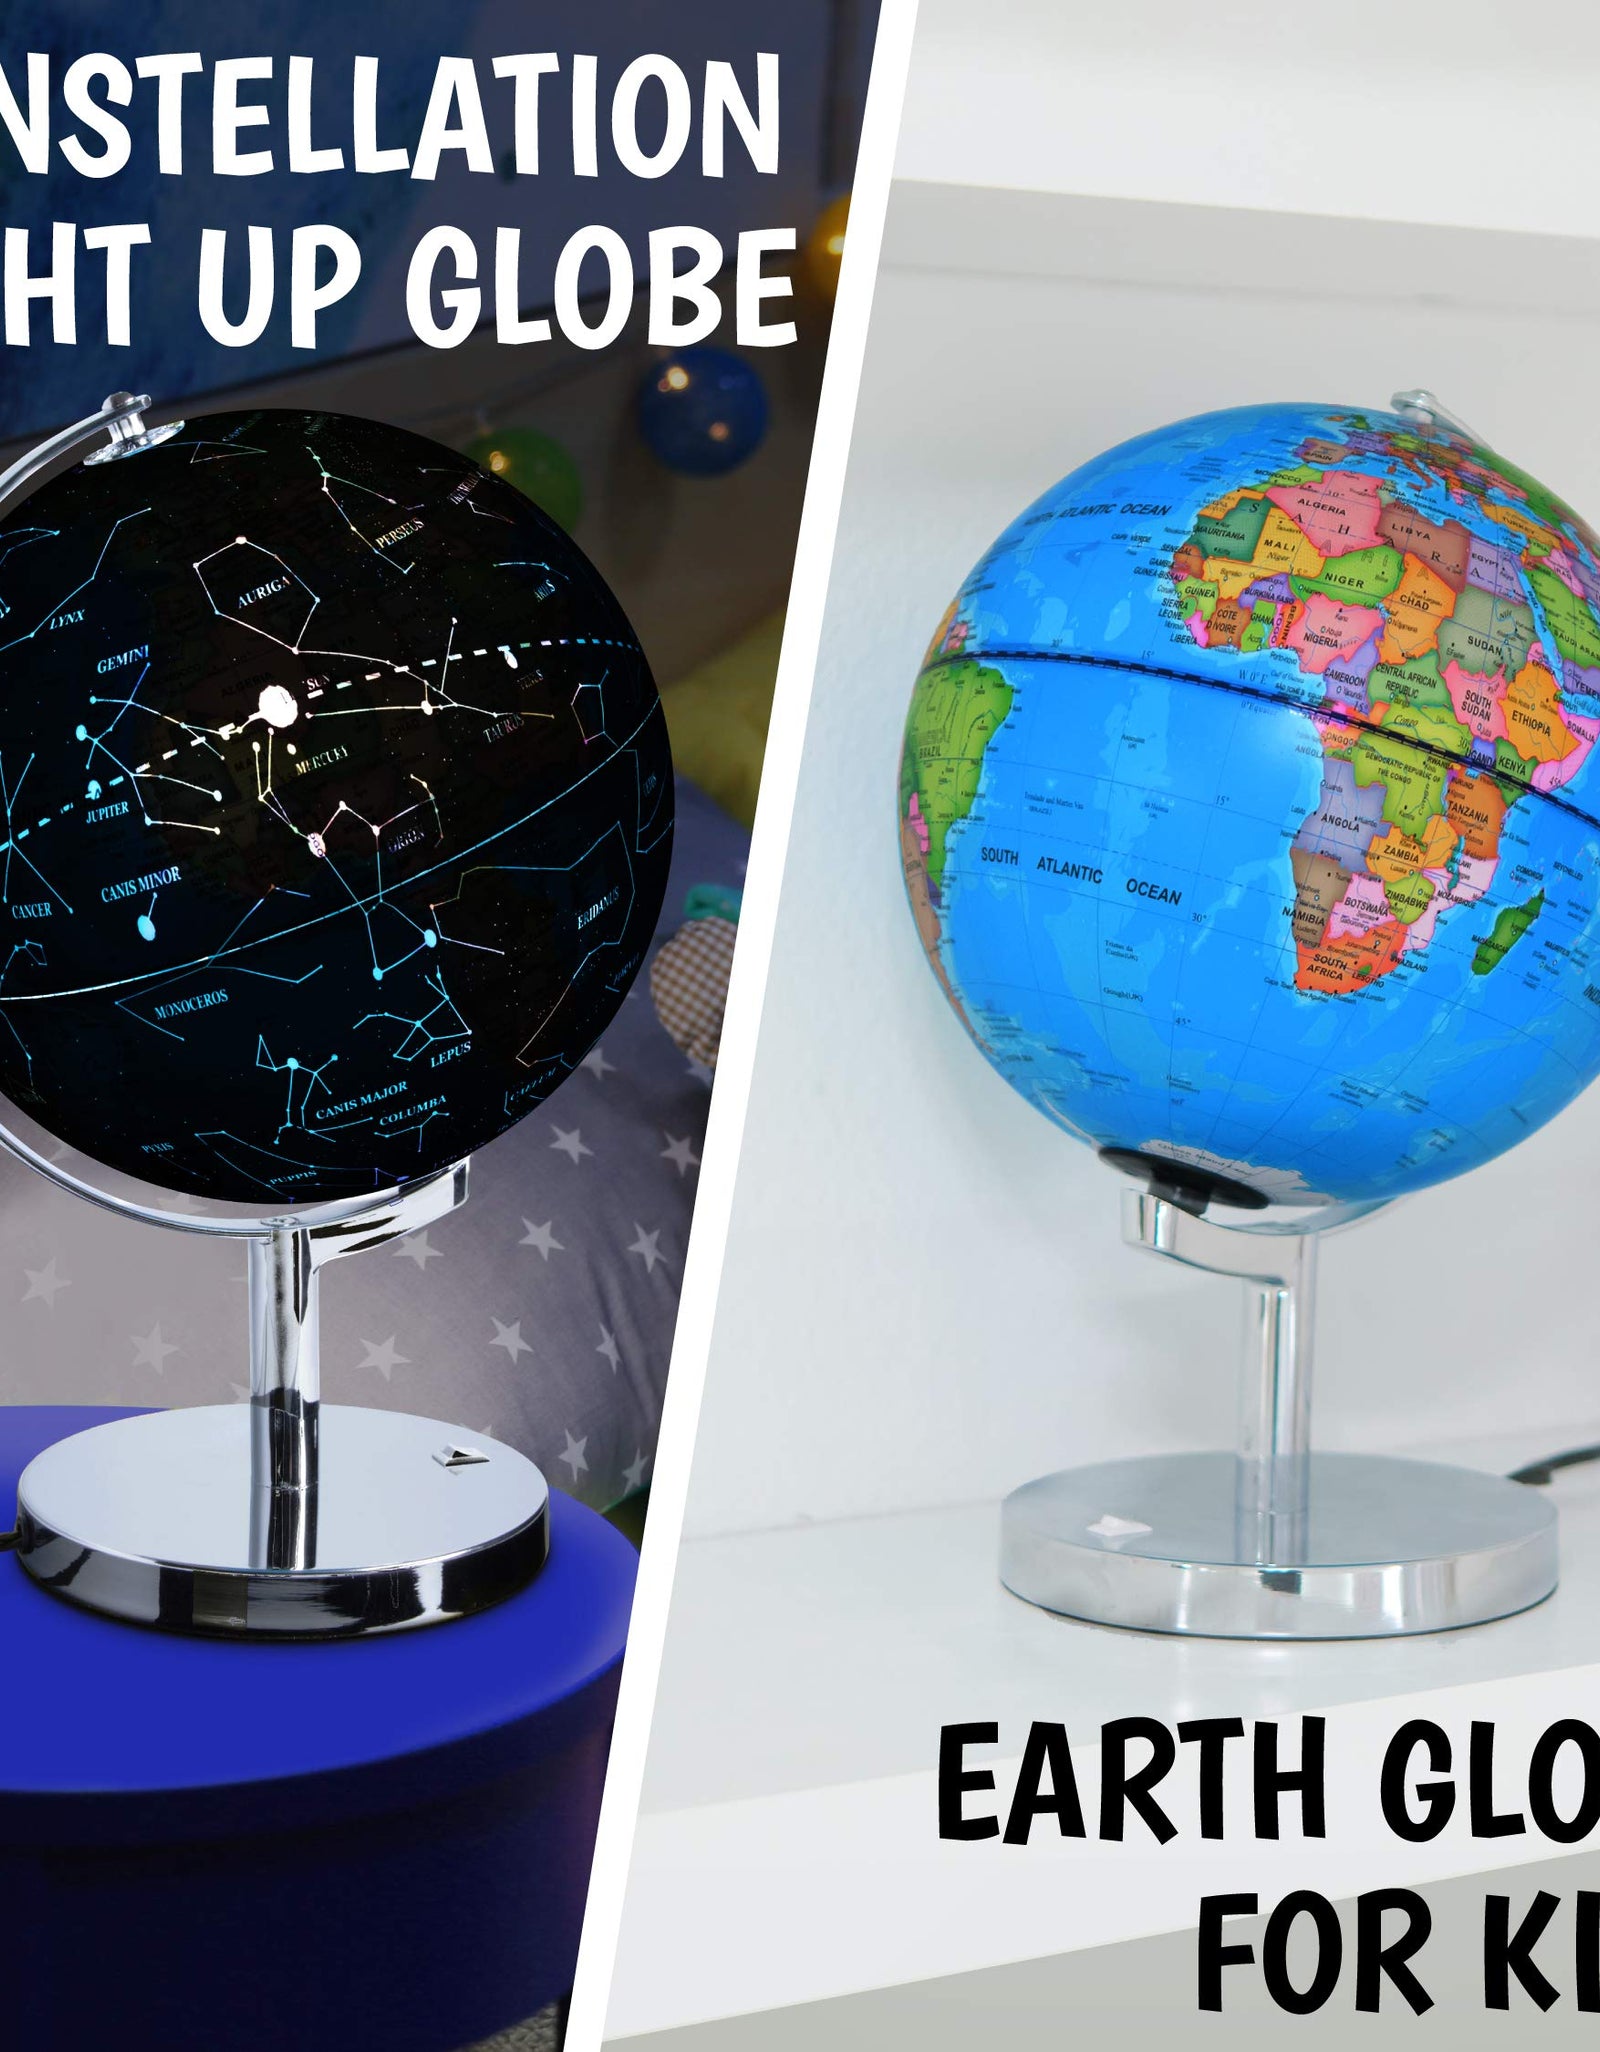 USA Toyz Illuminated Globe of The World with Stand - 3in1 World Globe, Constellation Globe Night Light, and Globe Lamp with Built-in LED, Easy to Read Texts, and Non-Tip Base, 13.5 Inch Tall